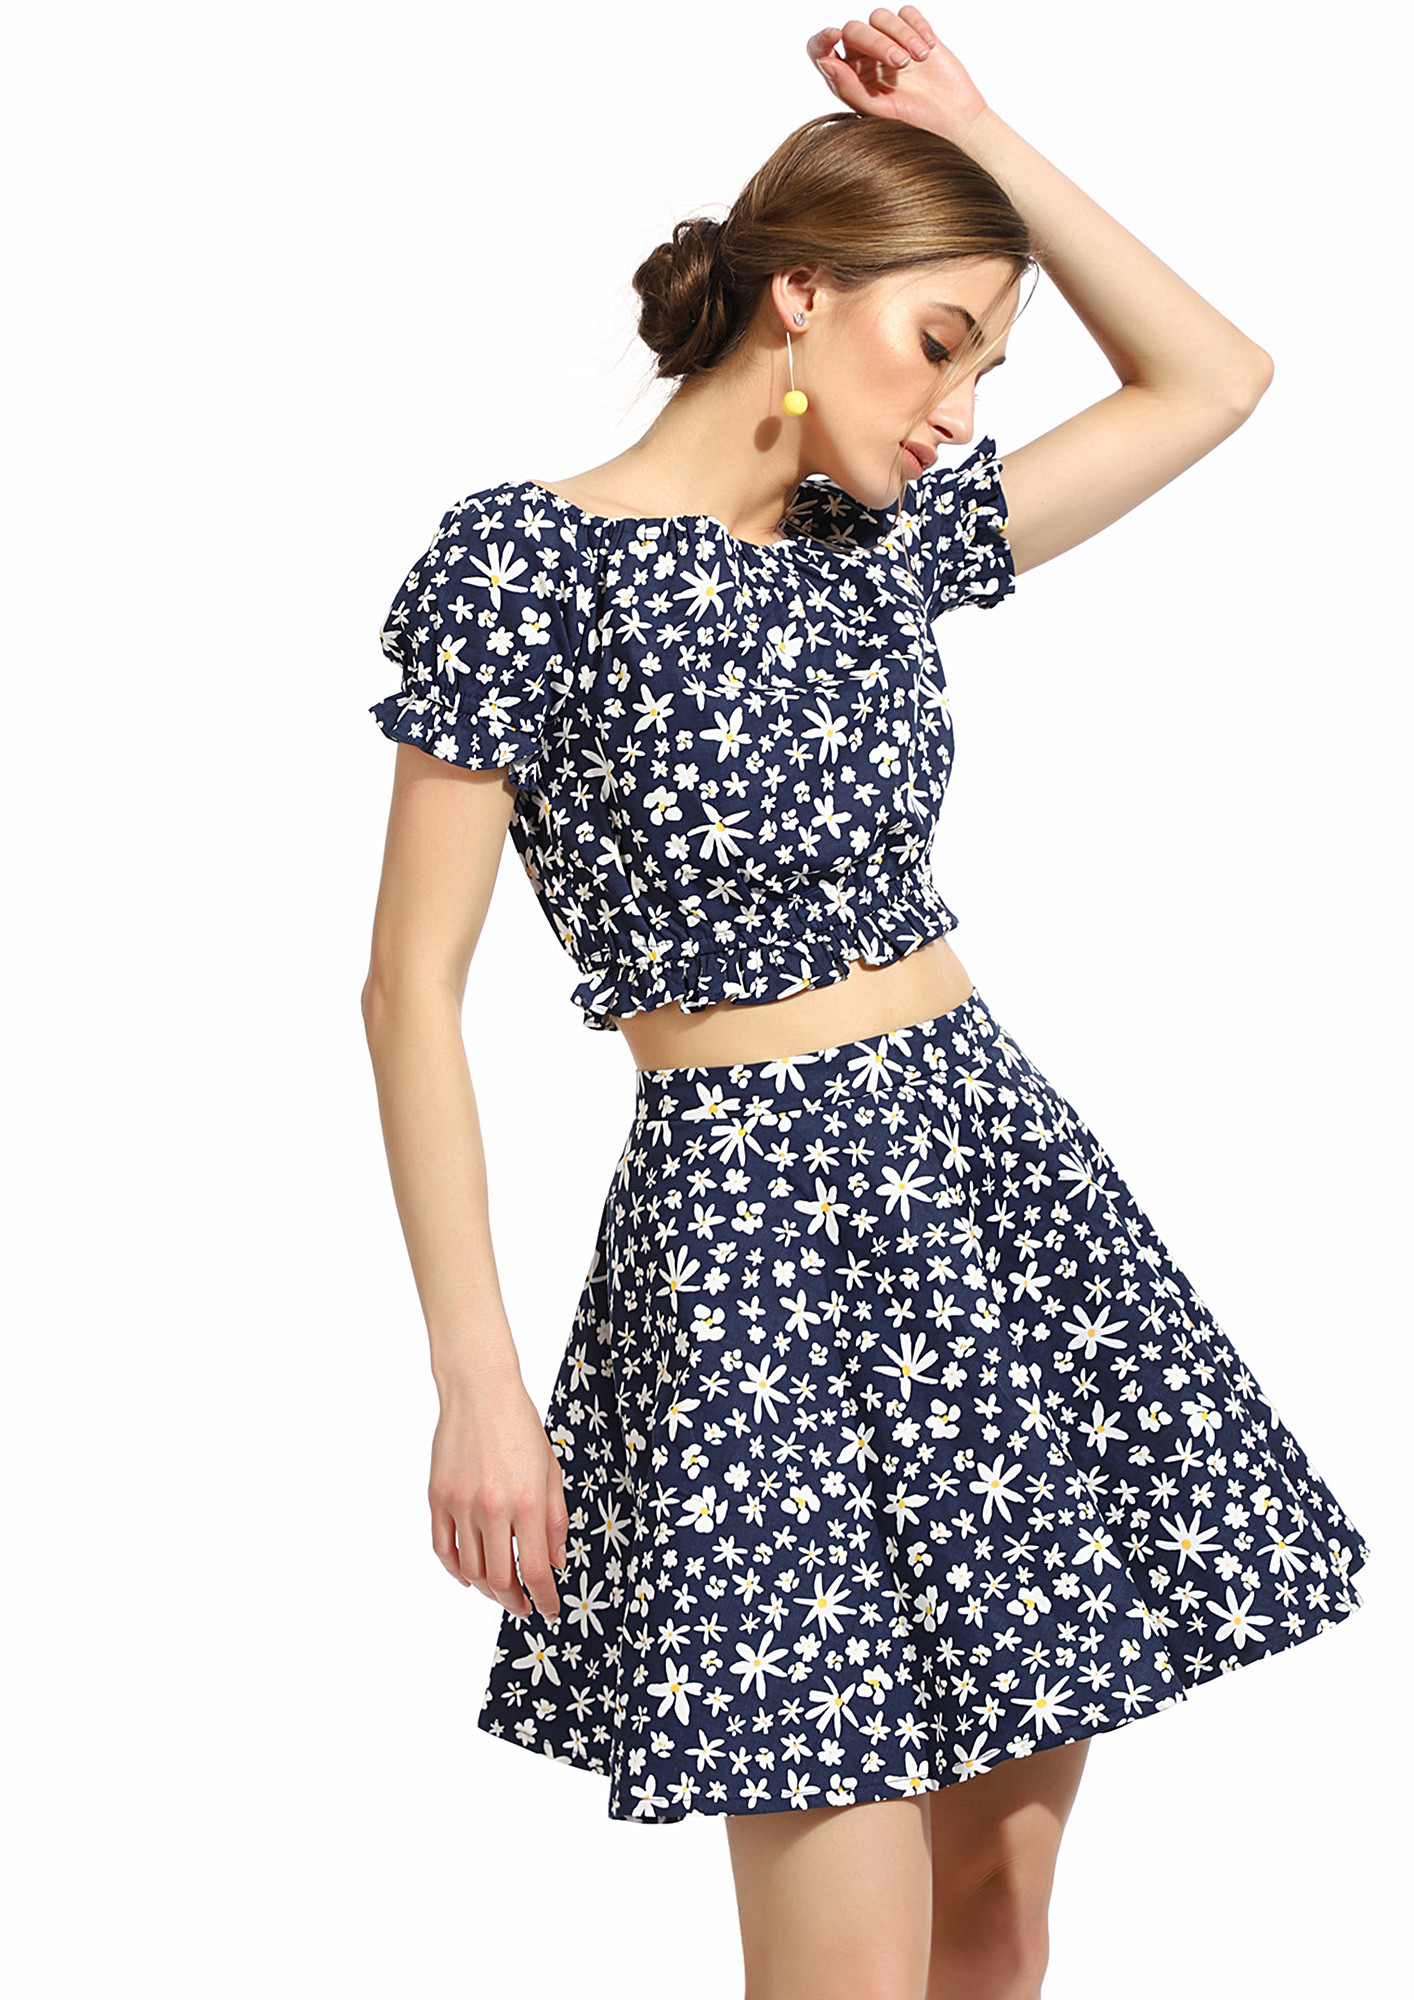 SPRING THE FUN NAVY BLUE TWO PIECE